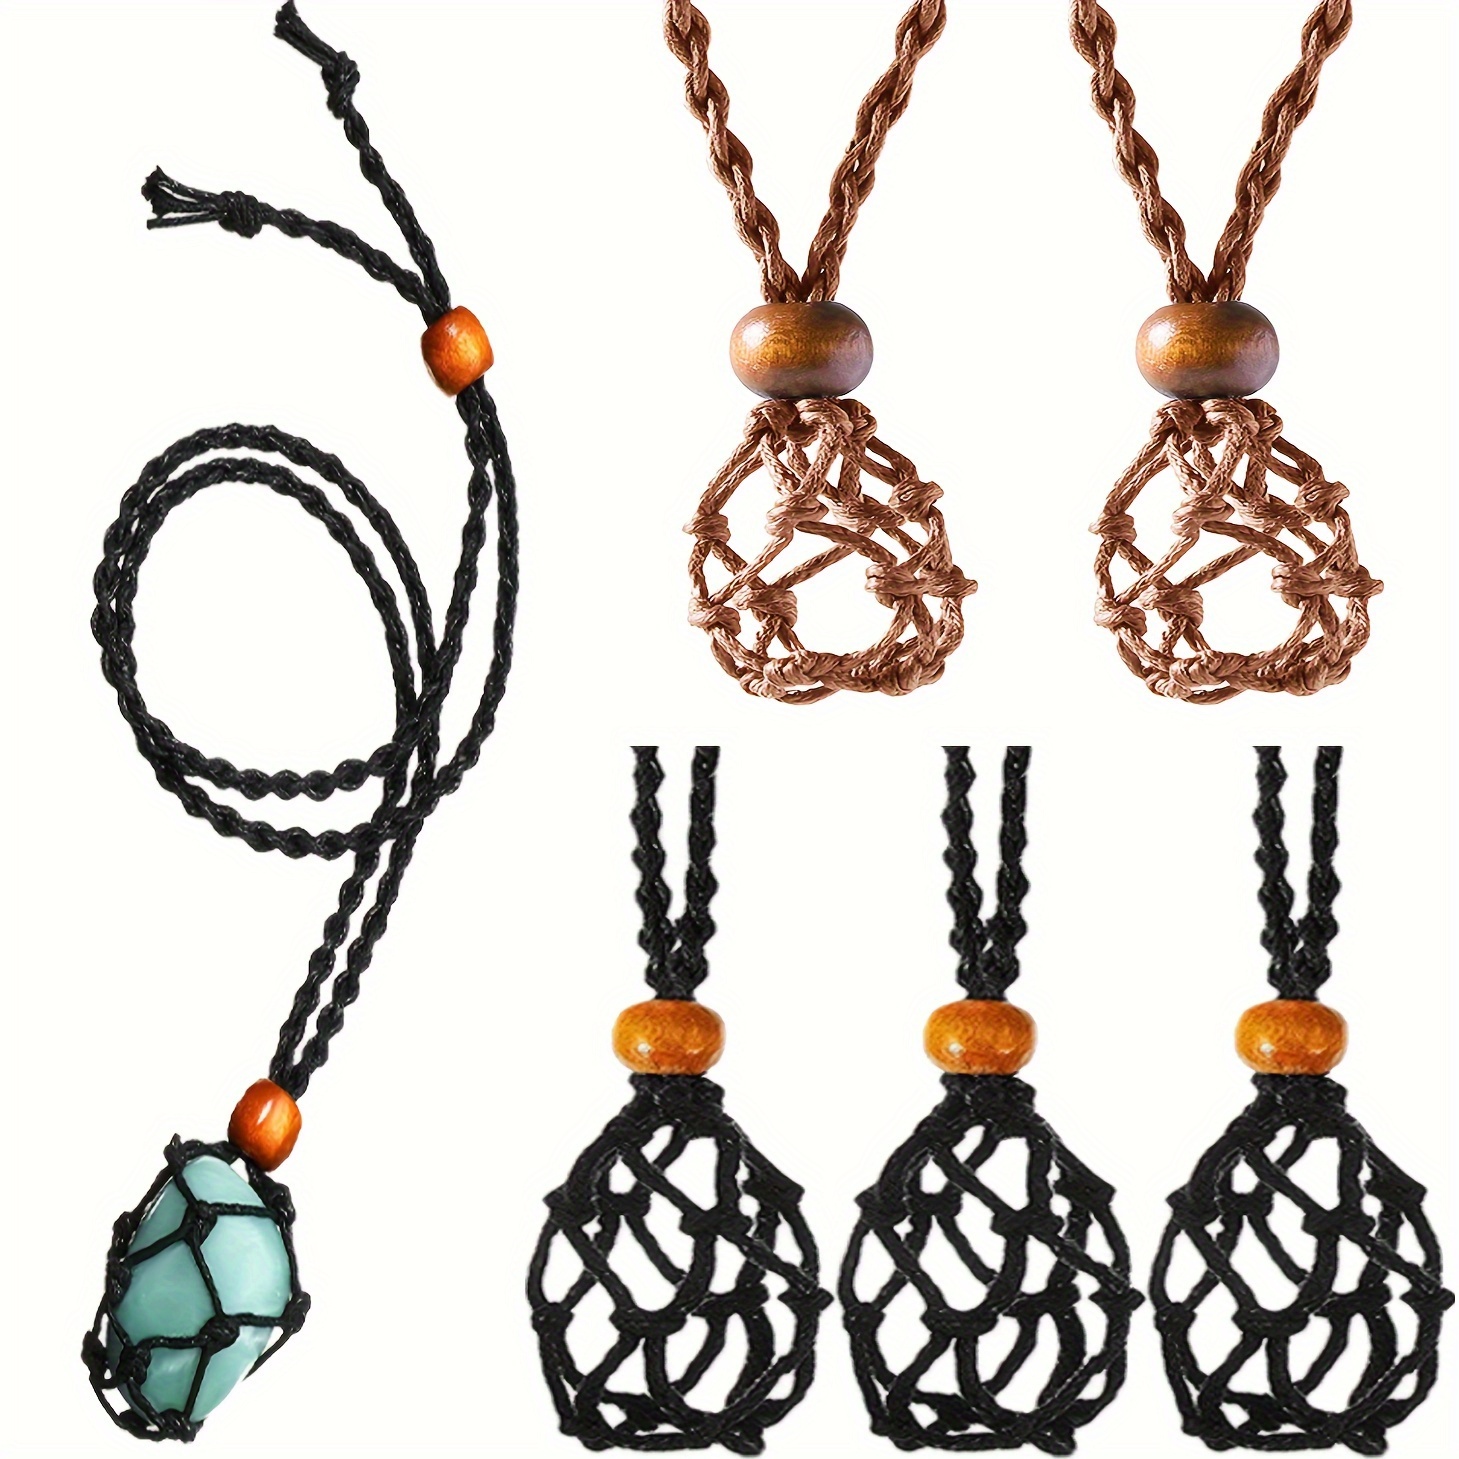 Cage Necklace Pendant Cord Spiral Bead Stone Holder for Jewelry Making Rose Gold